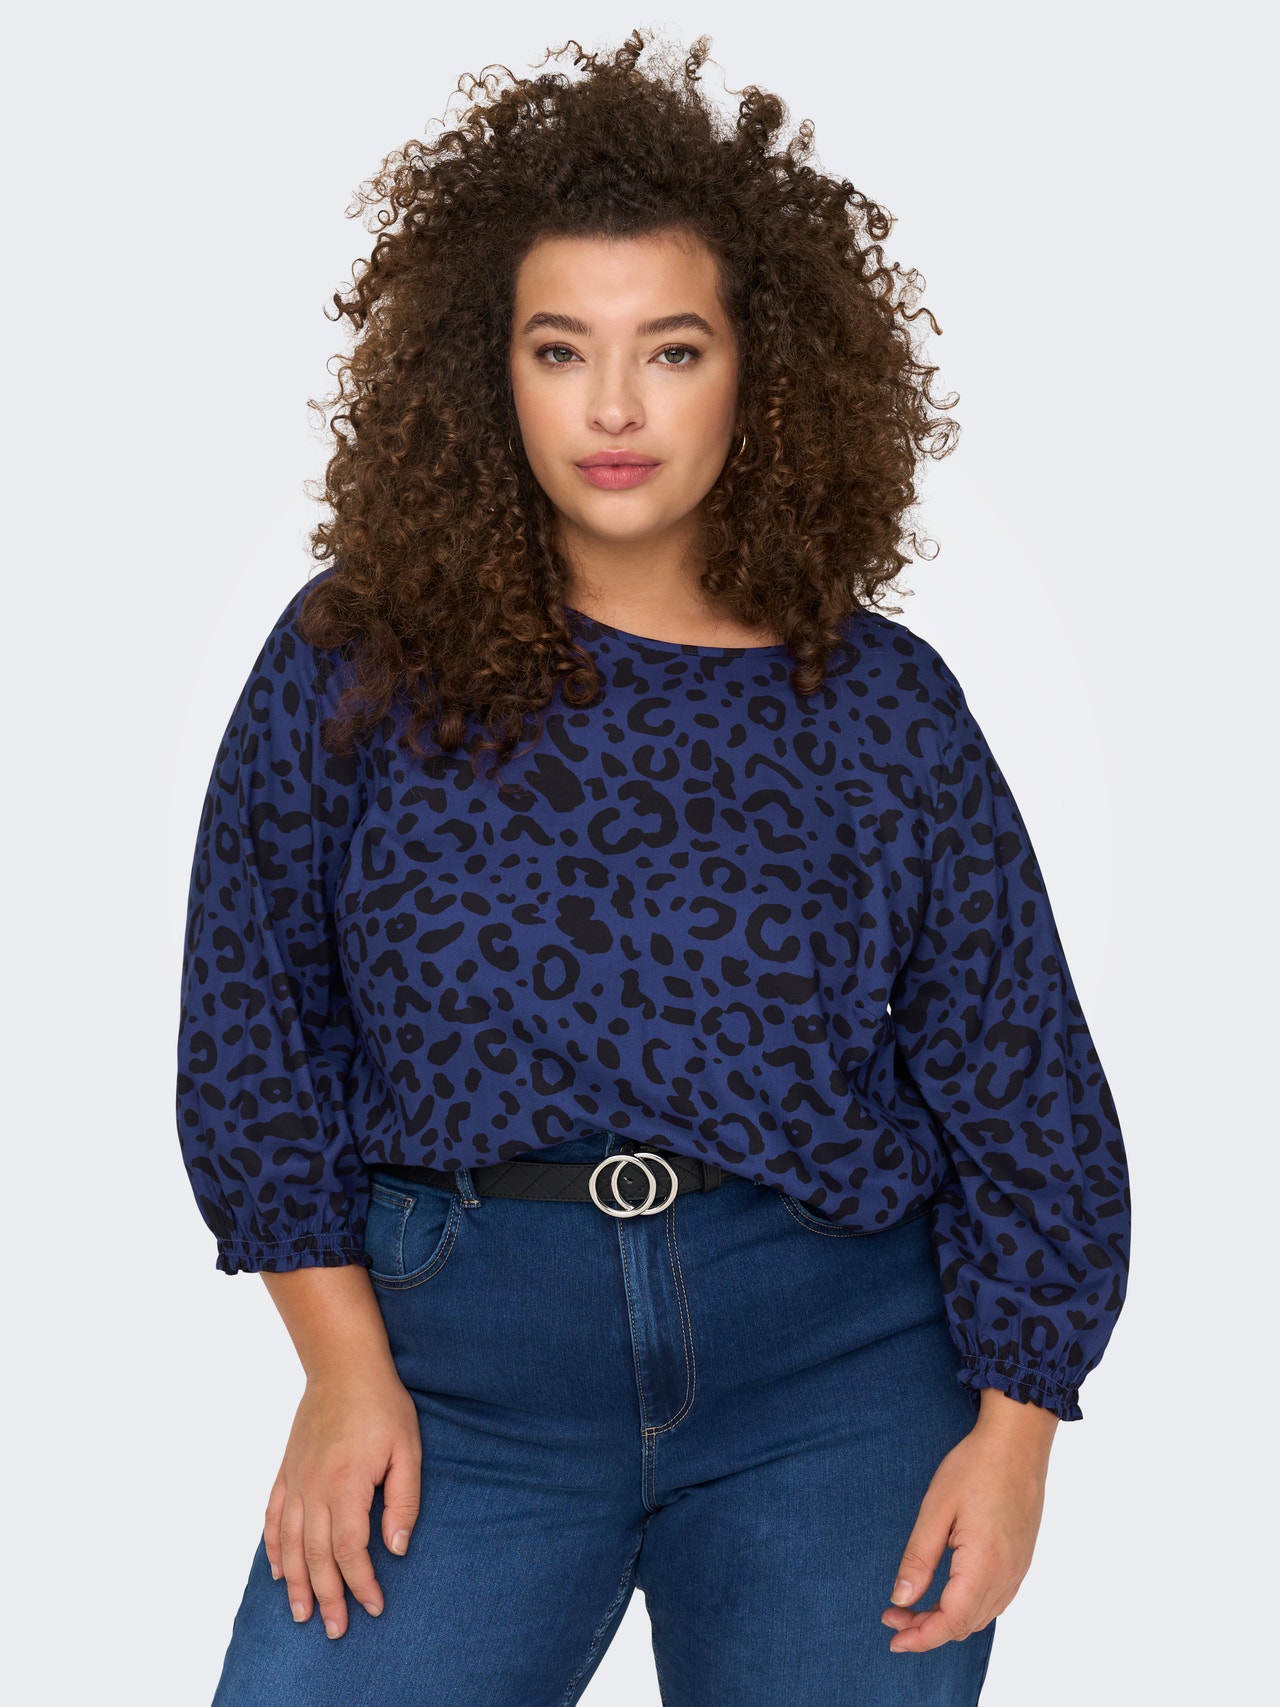 ONLY Curvy Patterned Top -Patriot Blue - 15285099